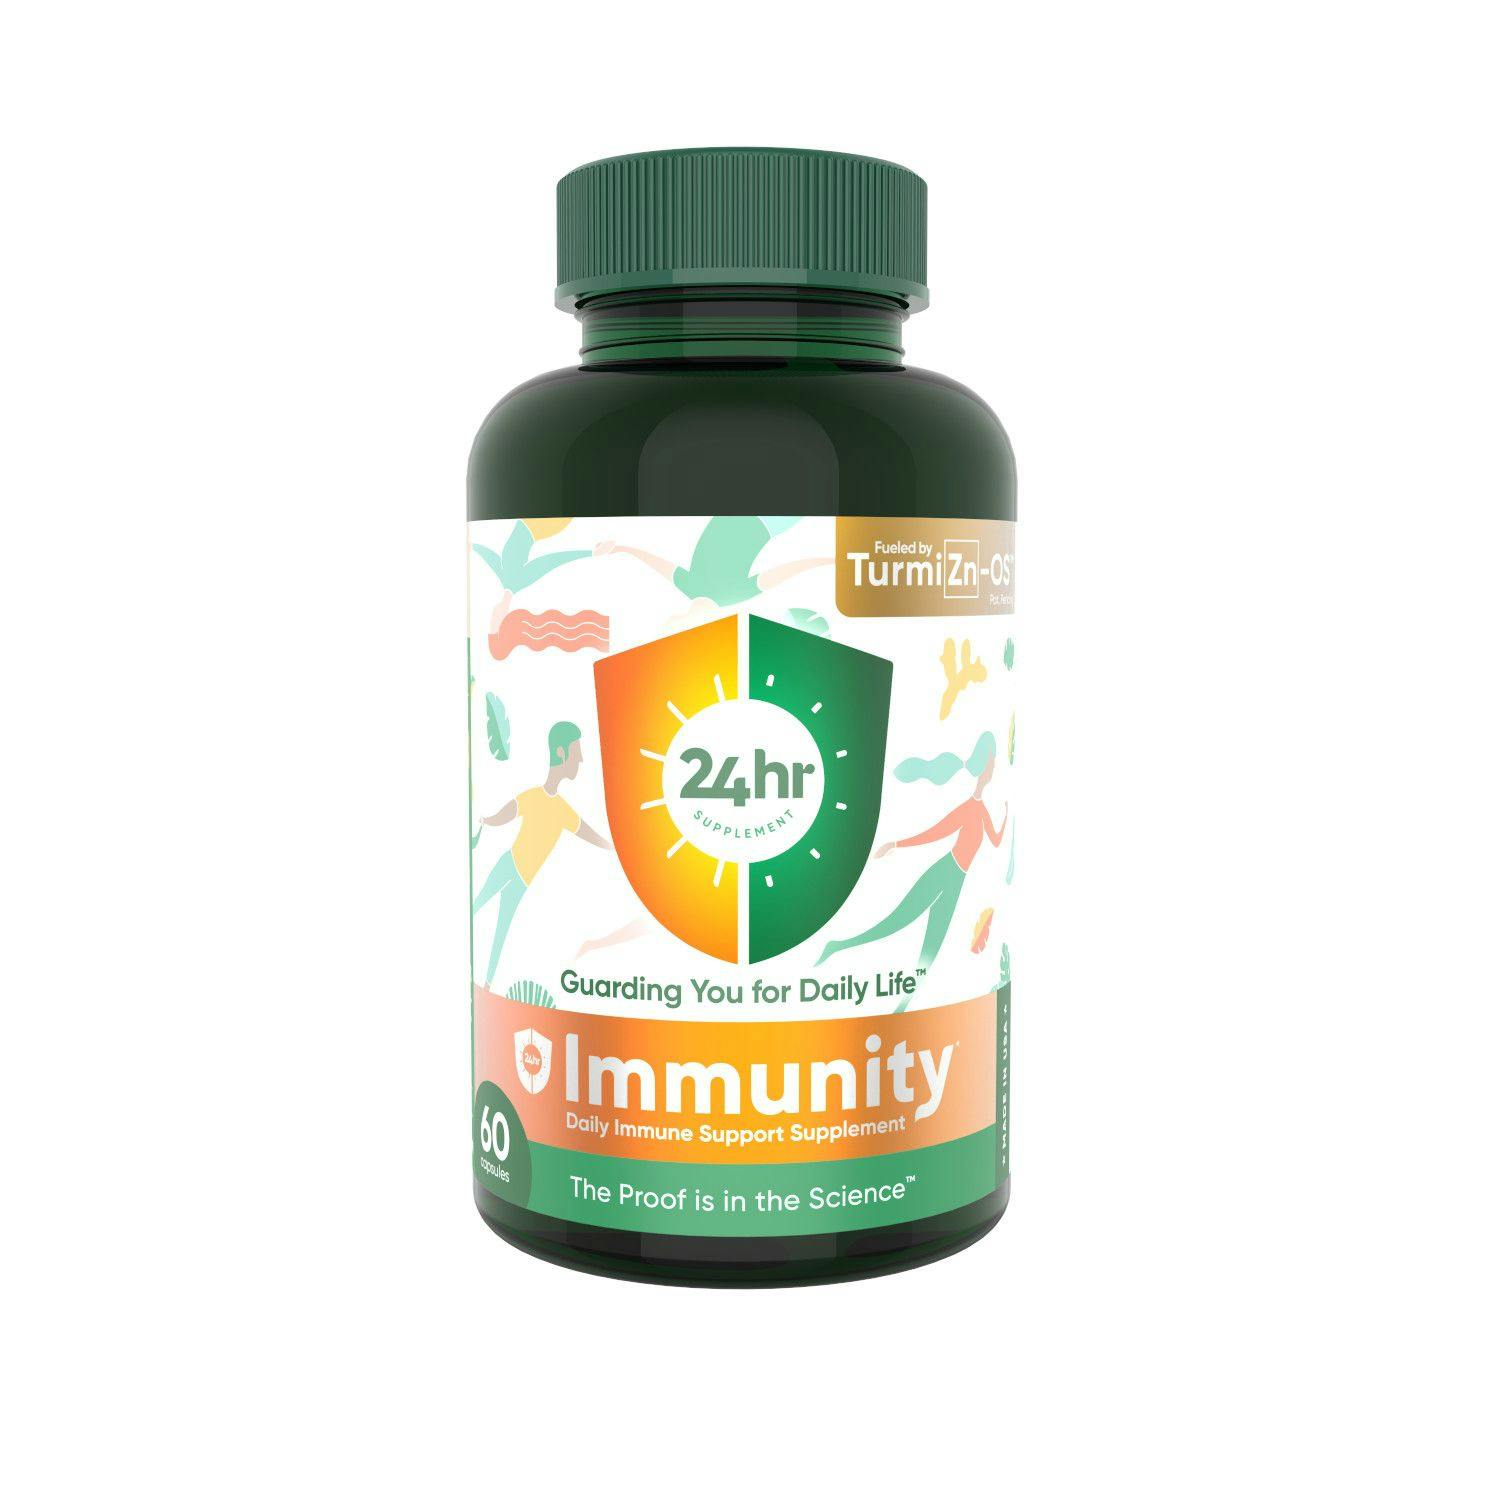 Immune-support supplement features curcumin complex to fight oxidative stress